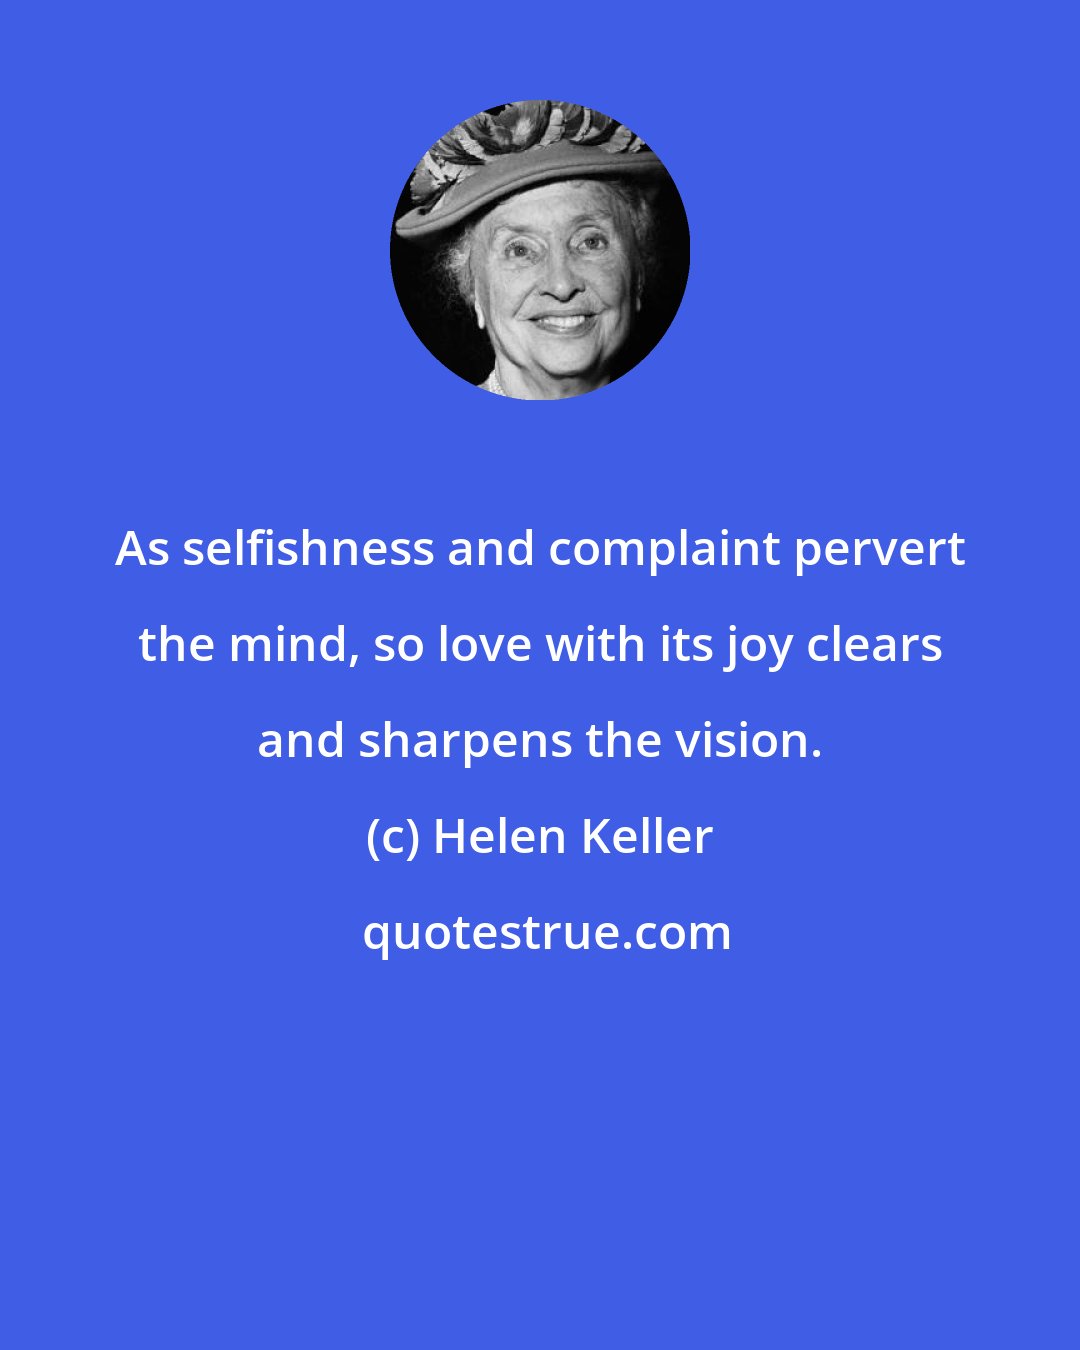 Helen Keller: As selfishness and complaint pervert the mind, so love with its joy clears and sharpens the vision.